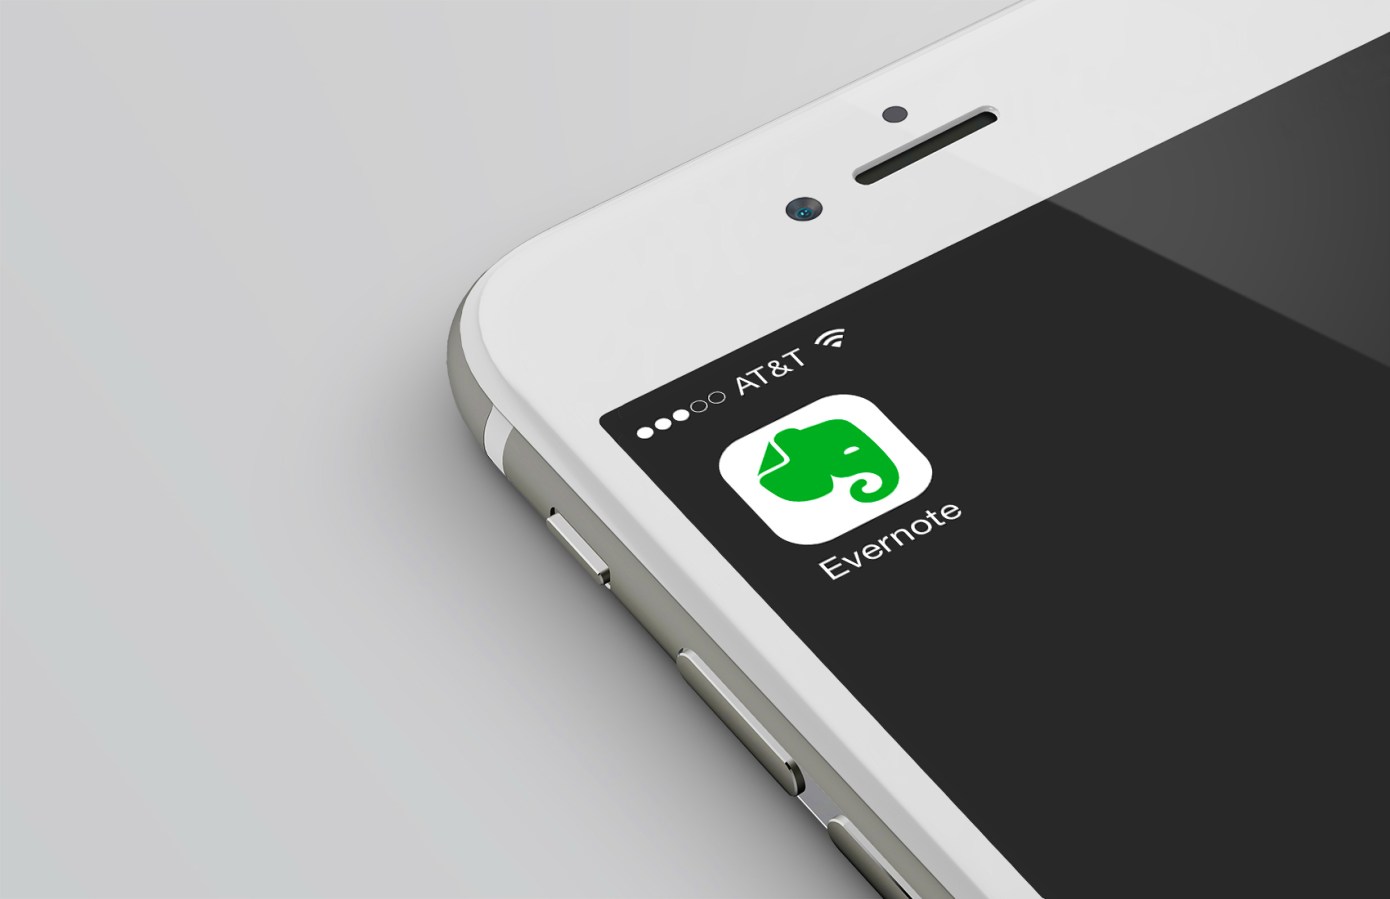 Bending Spoons acquires Evernote